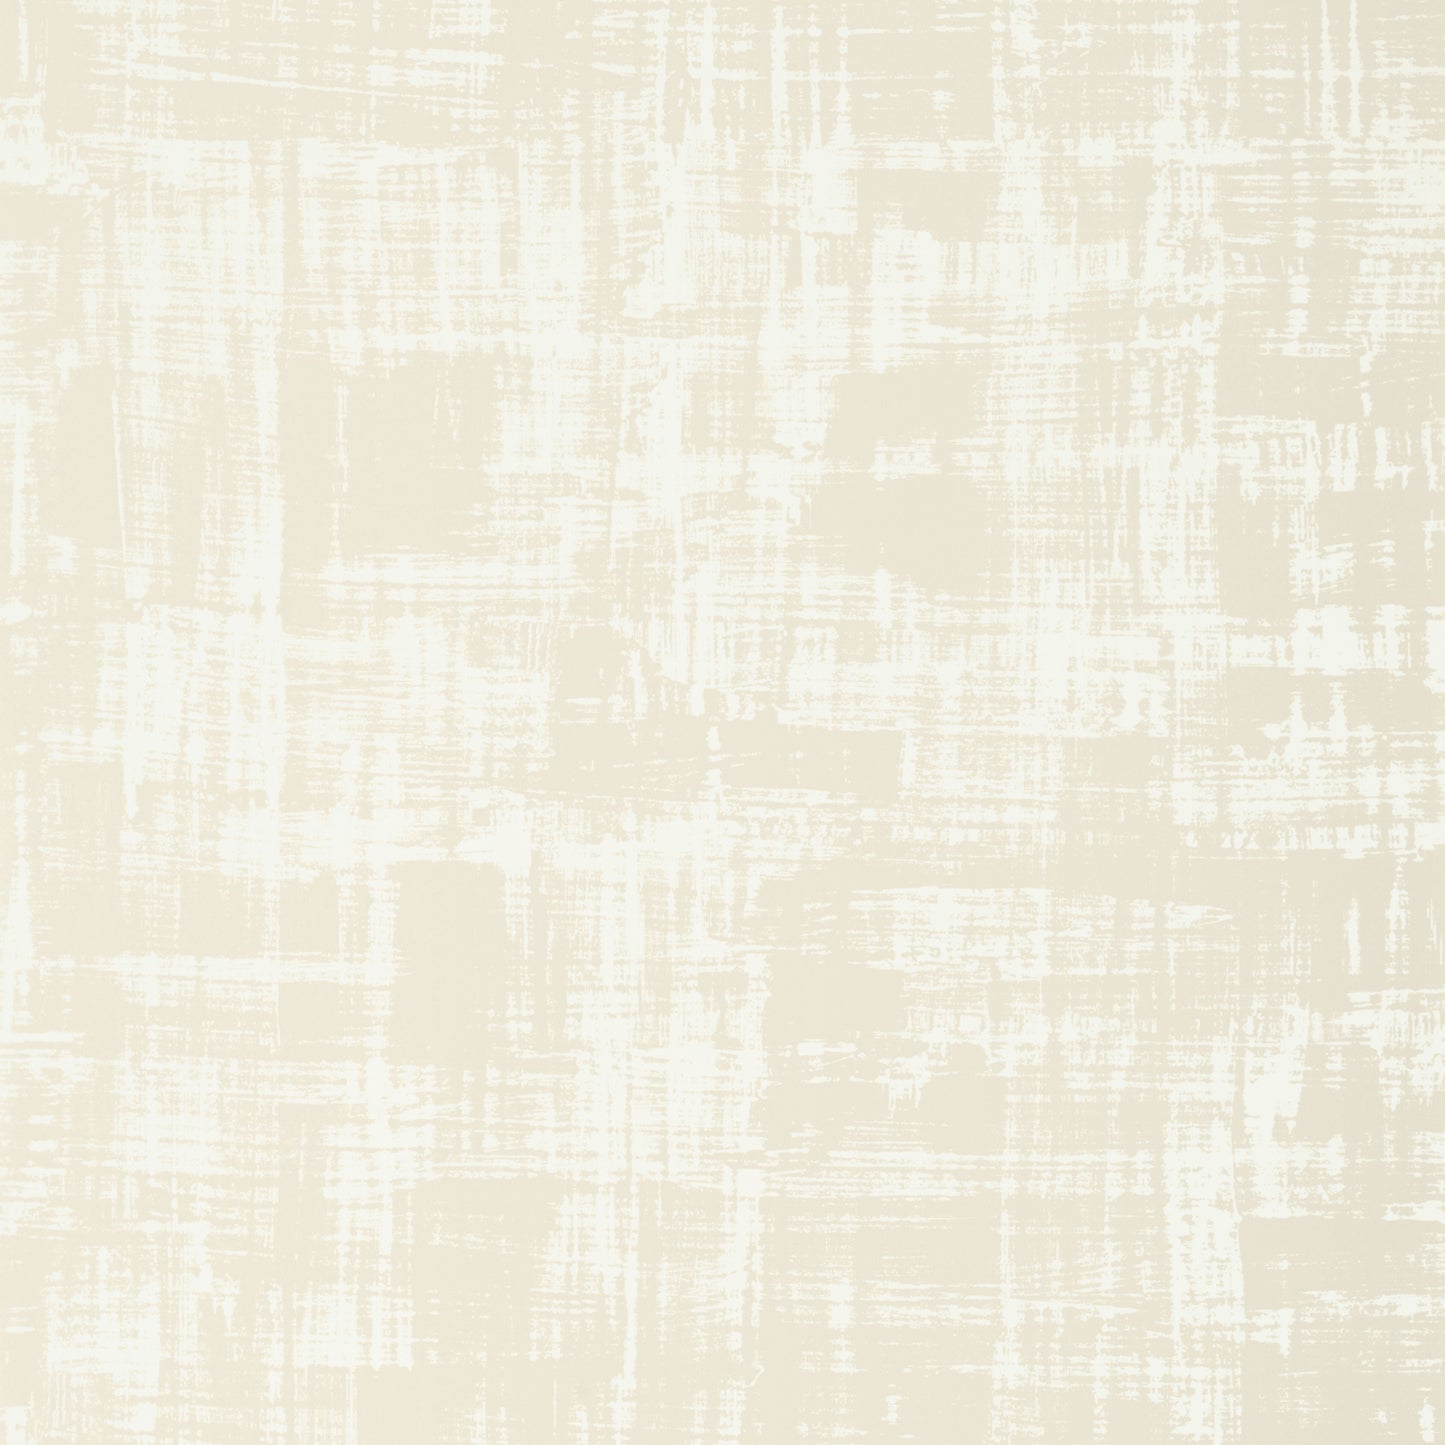 Purchase  Ann French Wallpaper Pattern number AT6027 pattern name  Braxton Texture